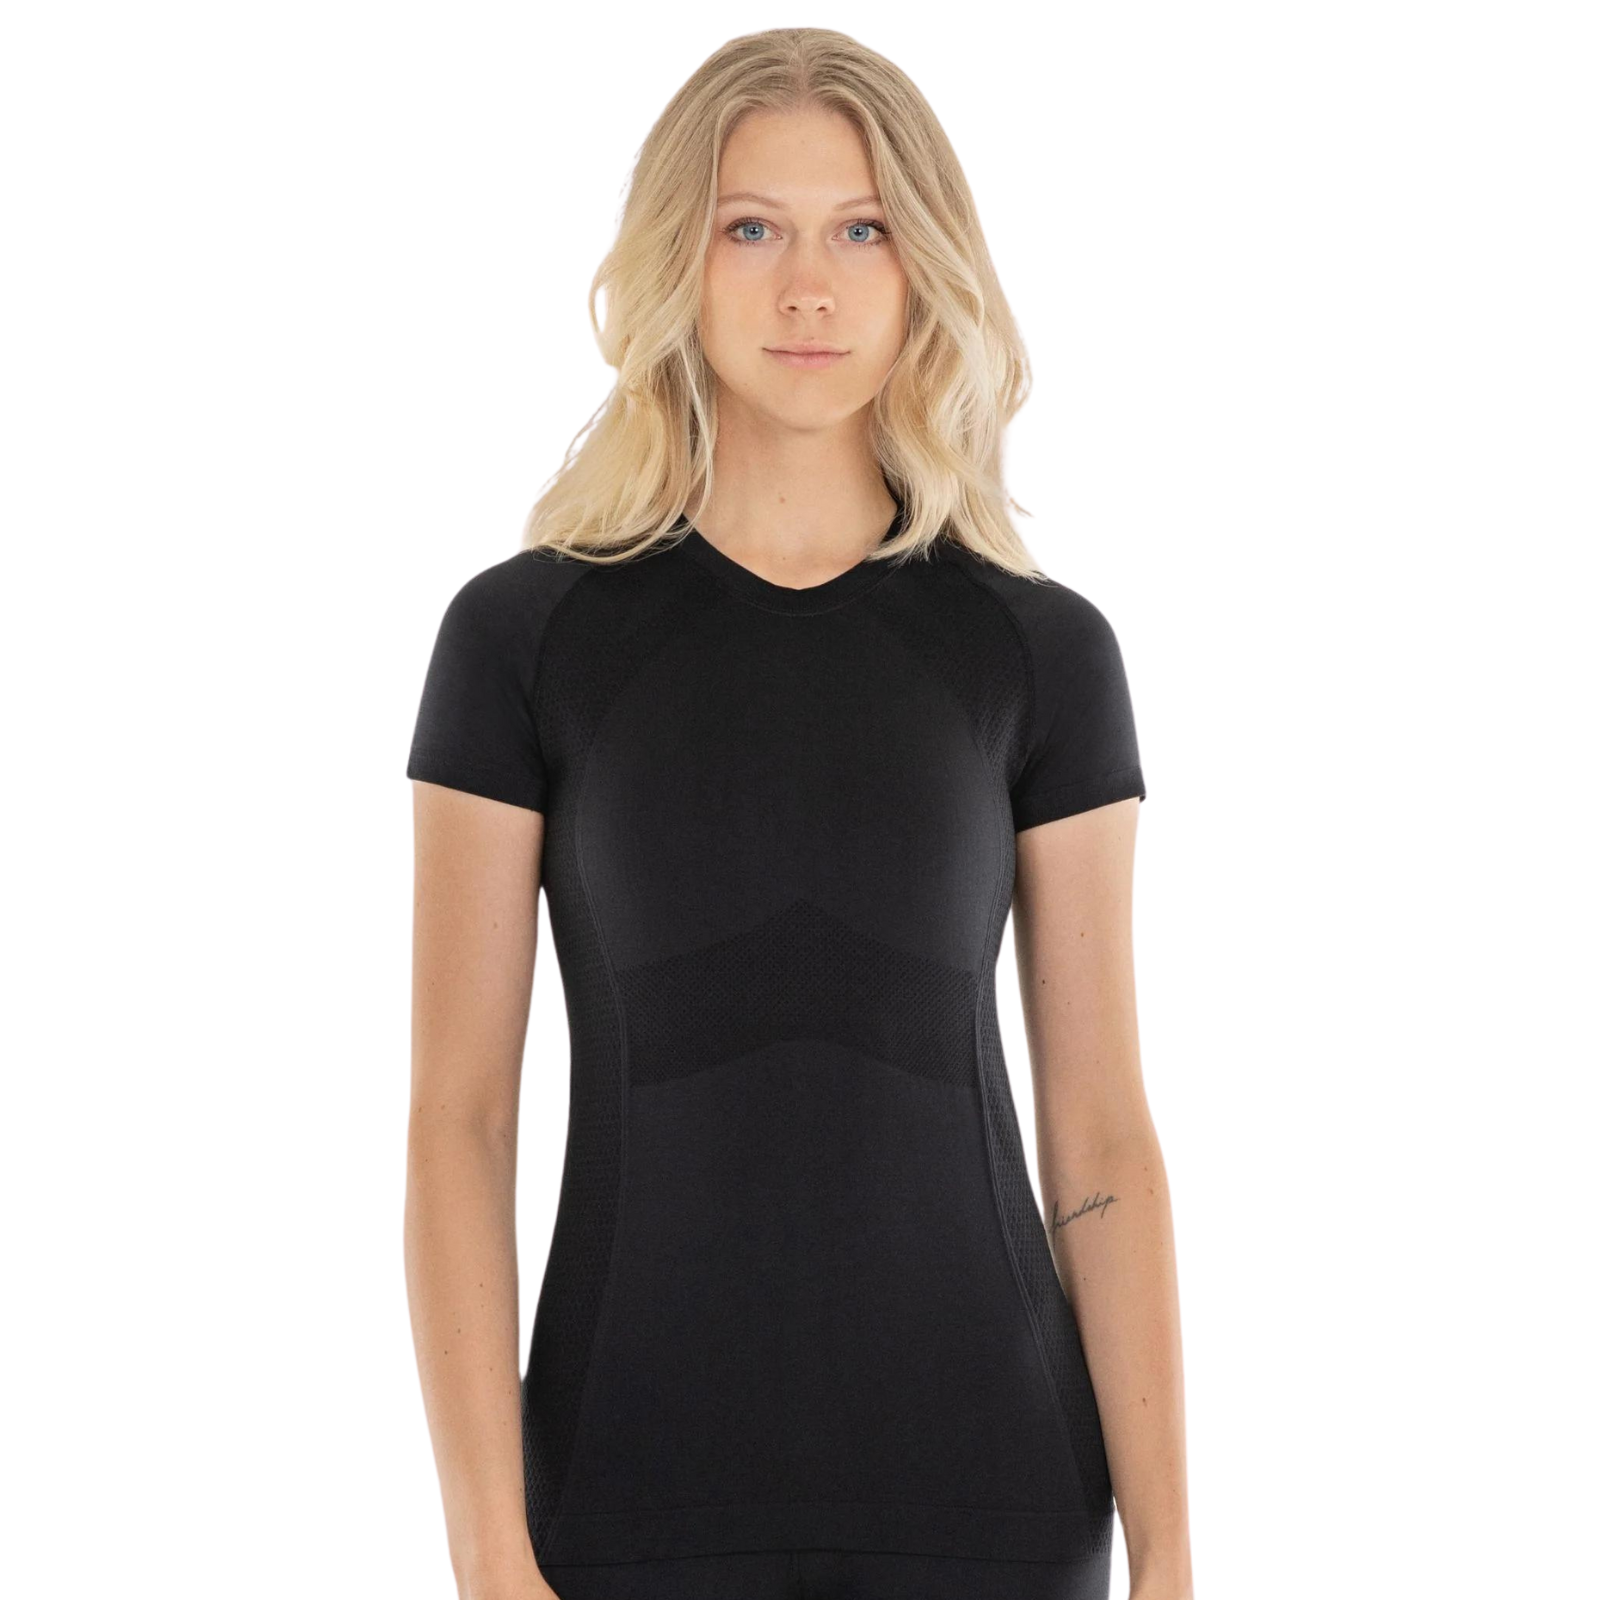 Anique Short Sleeve Crew Shirt in Black Swan - Women&#39;s Small (4-6)